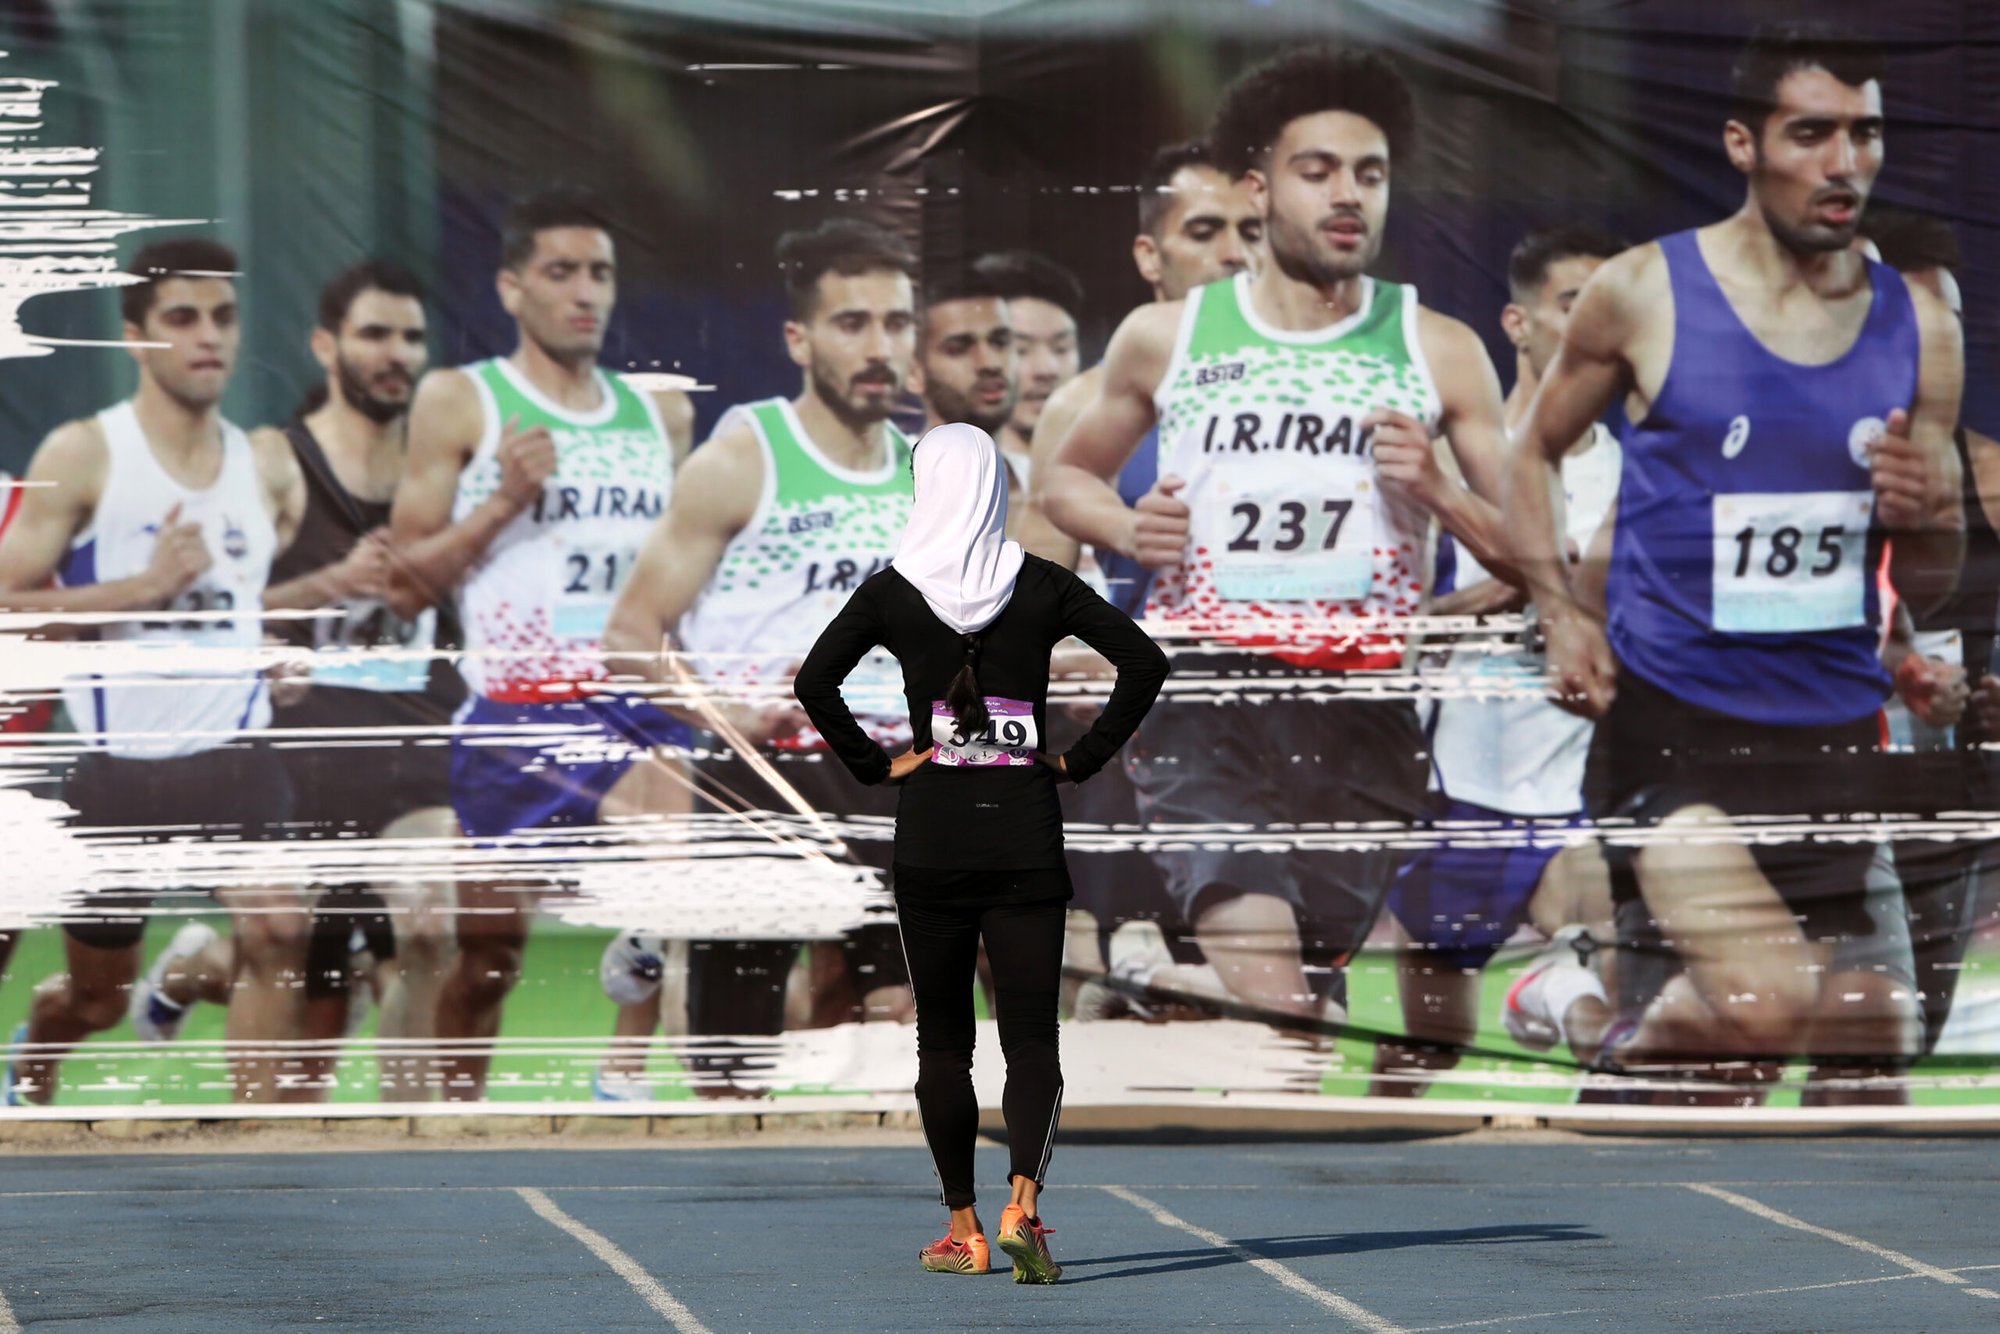 Picture shows a female athlete preparing to compete in the starting line with the mandatory hijab cover. She looks at pictures of male athletes in comfortable, standard competition clothes.